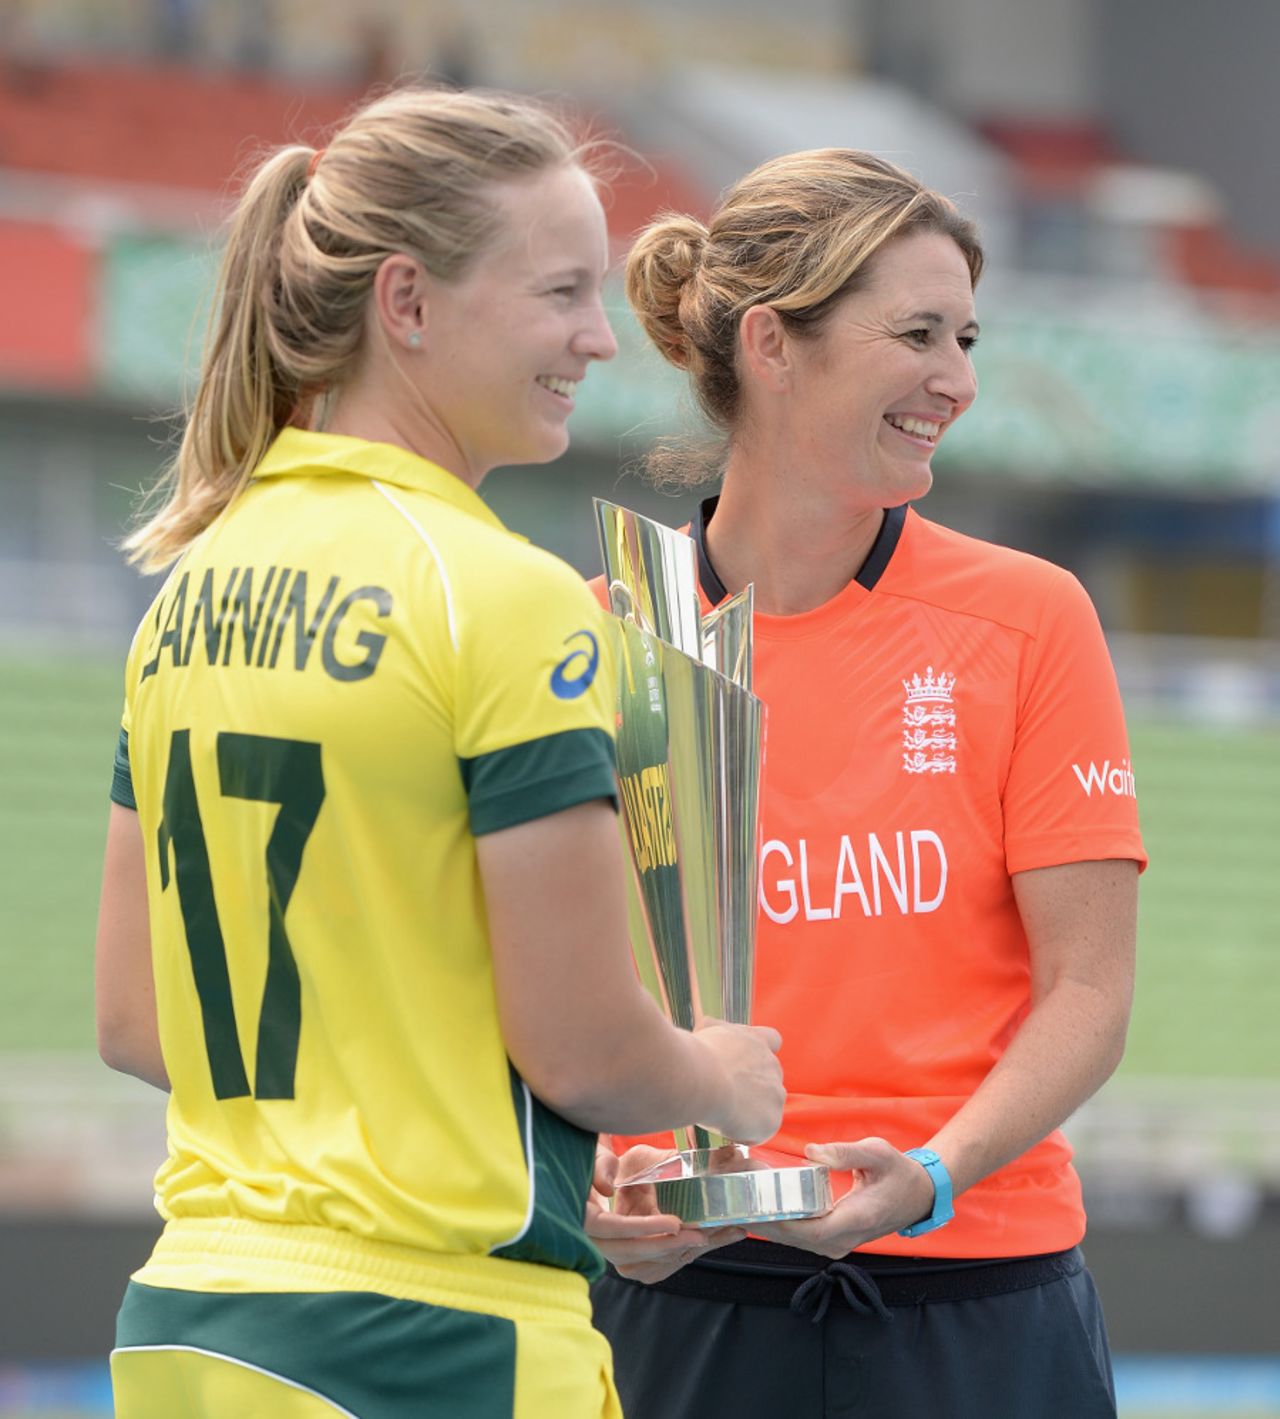 Meg Lanning and Charlotte Edwards have the World T20 title in their sights, Mirpur, April 5, 2014